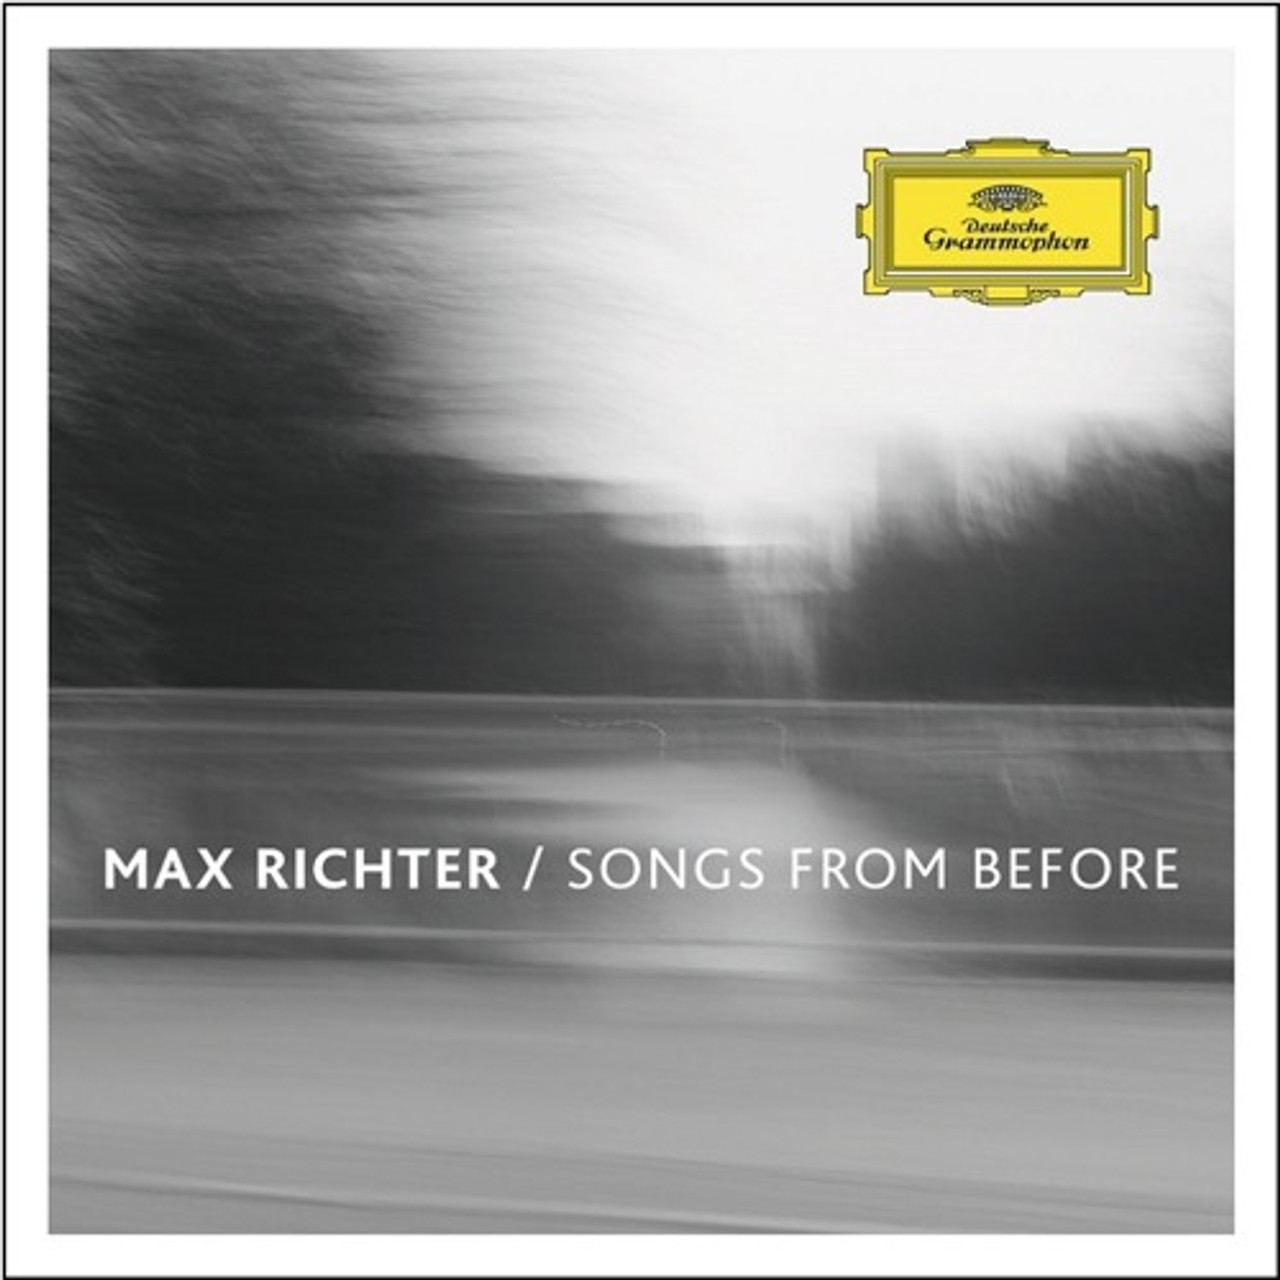 Max Richter - Songs From Before (180g Vinyl LP) - Music Direct